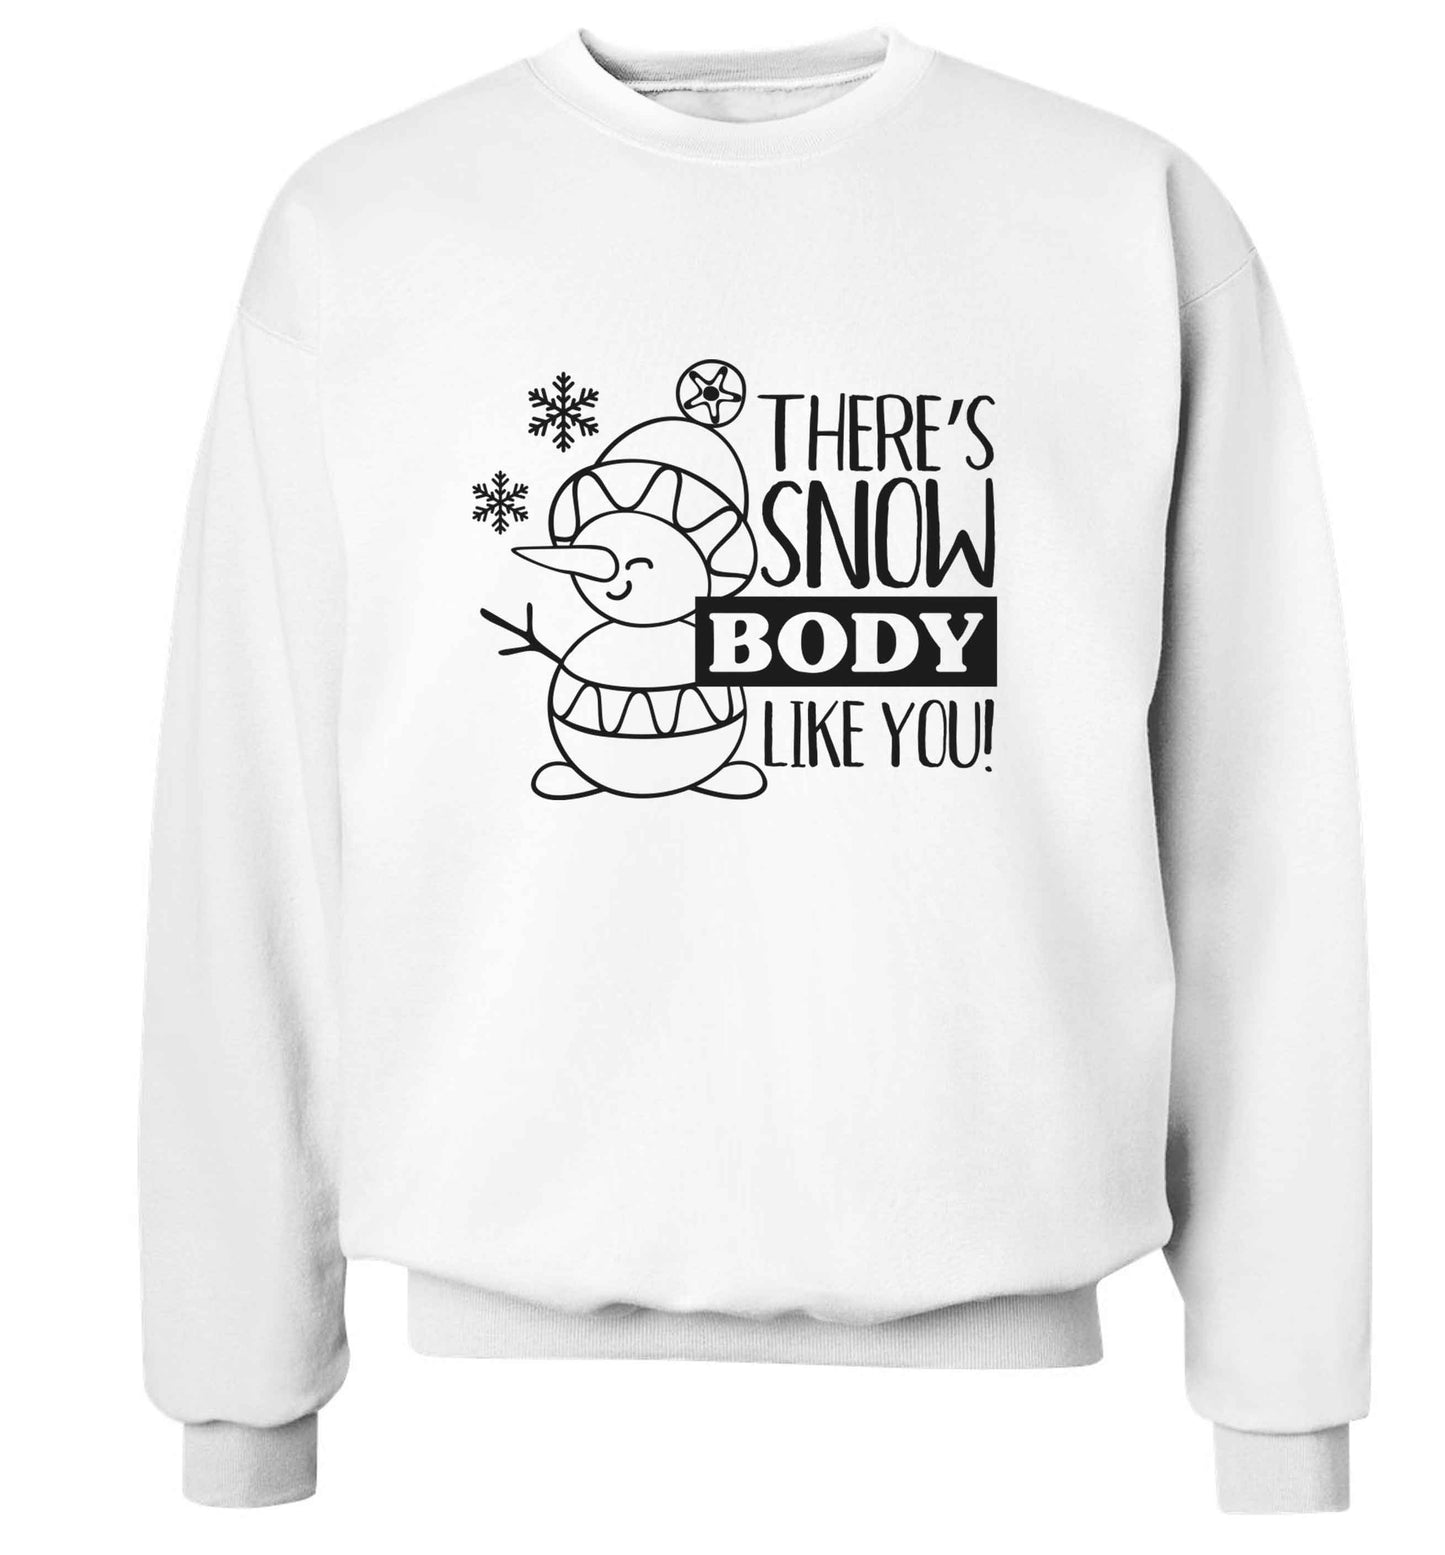 There's snow body like you adult's unisex white sweater 2XL